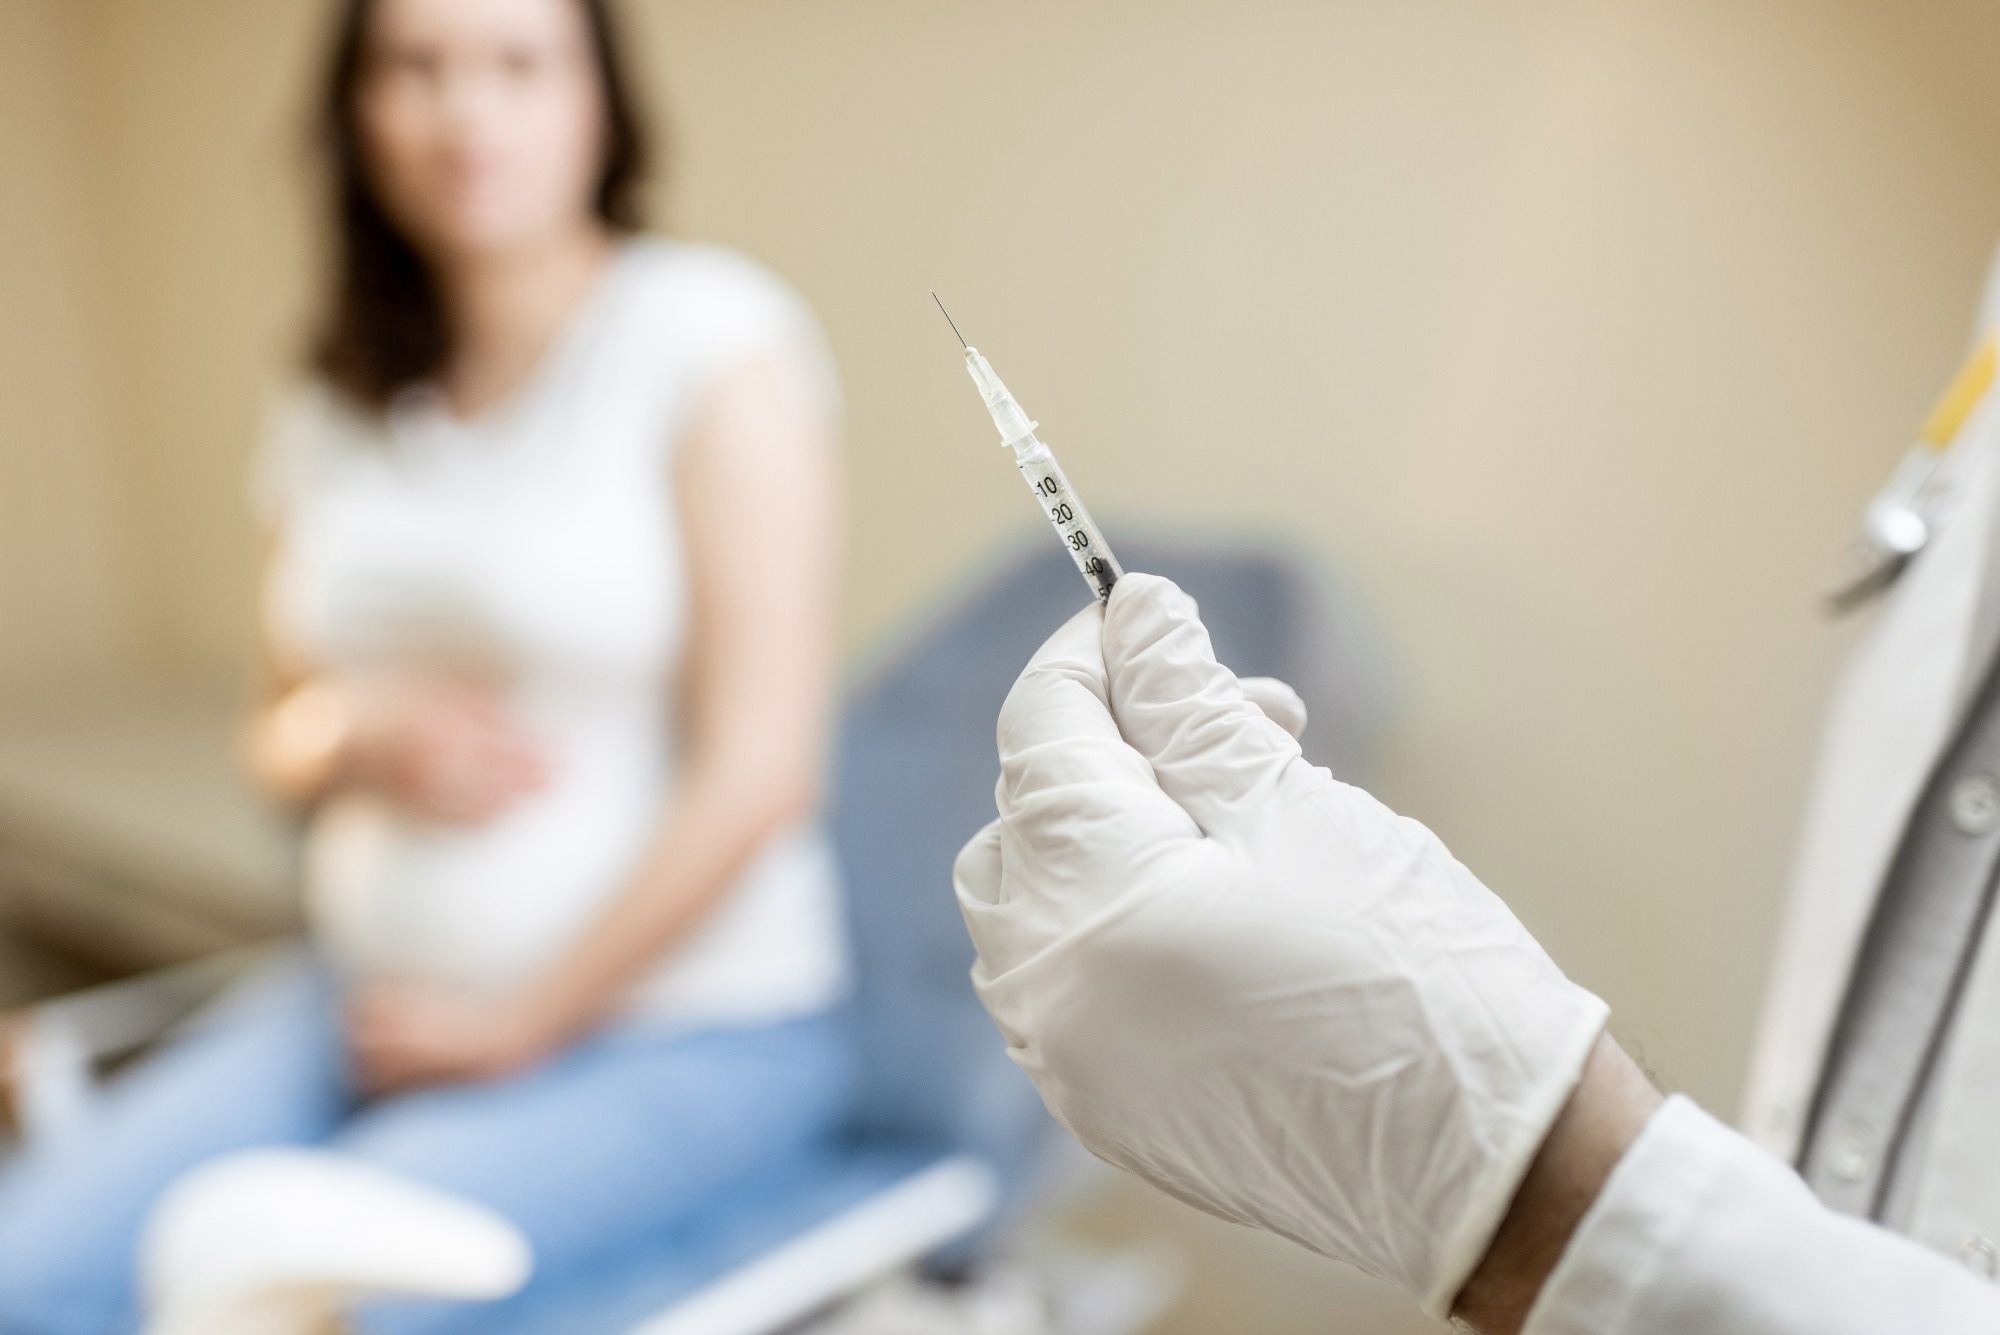 Study: Half-life estimation of pertussis-specific maternal antibodies in (pre)term infants after in-pregnancy tetanus, diphtheria, acellular pertussis vaccination. Image Credit: RossHelen/Shutterstock.com